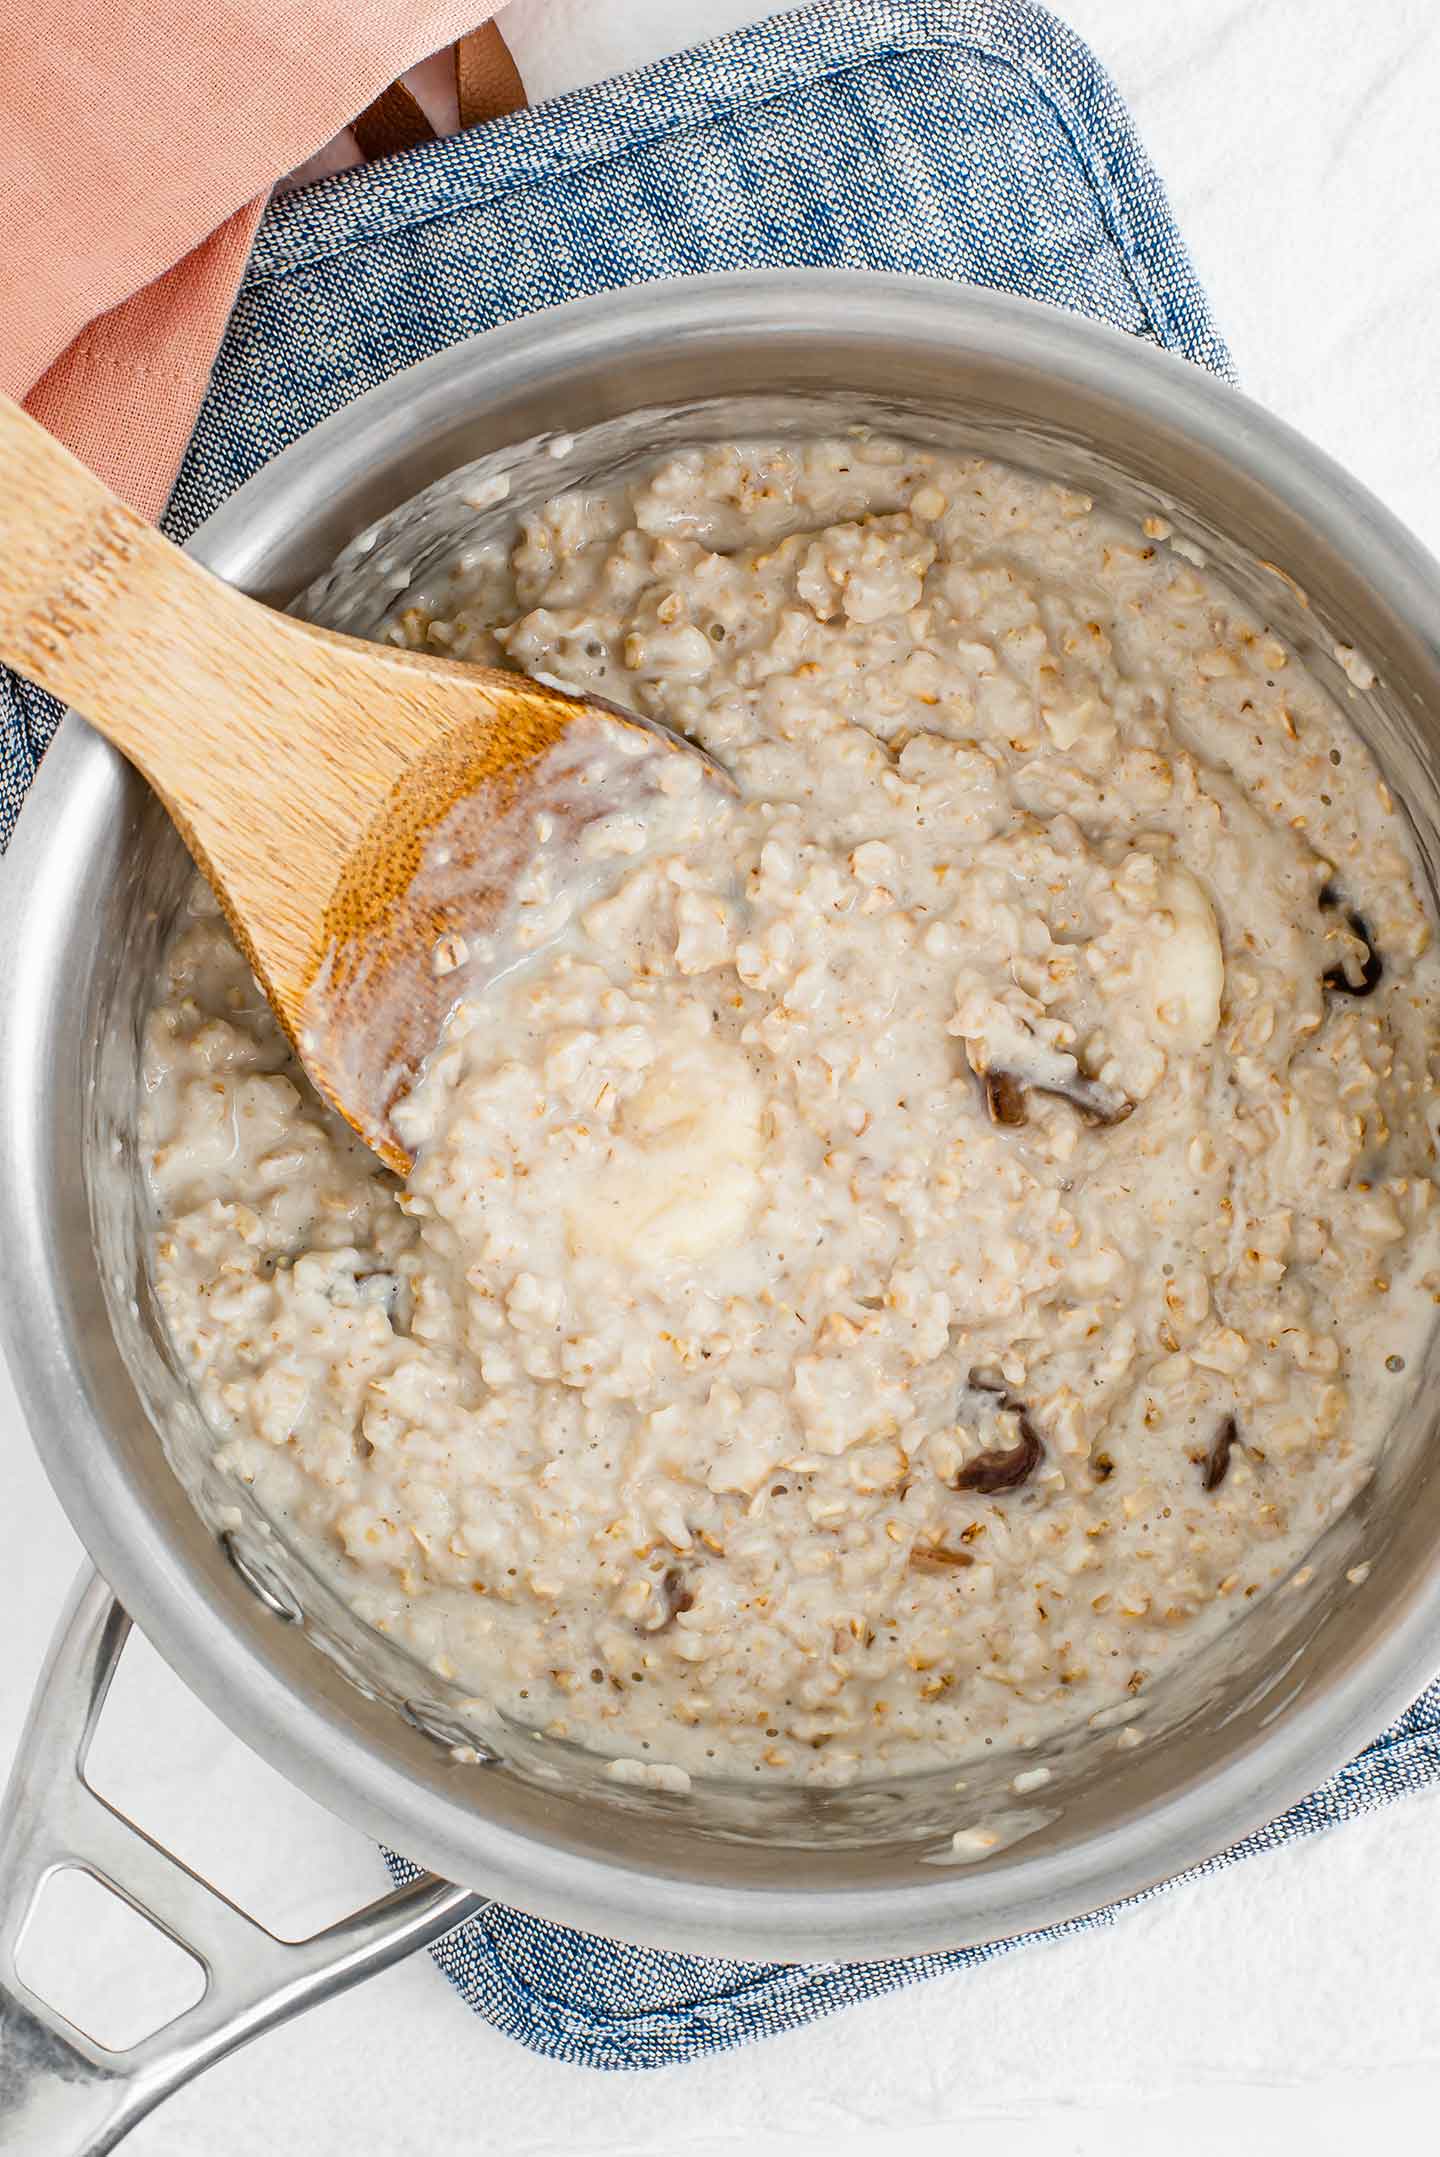 Top down view of a wooden spoon resting in creamy cooked oatmeal in a small pot.